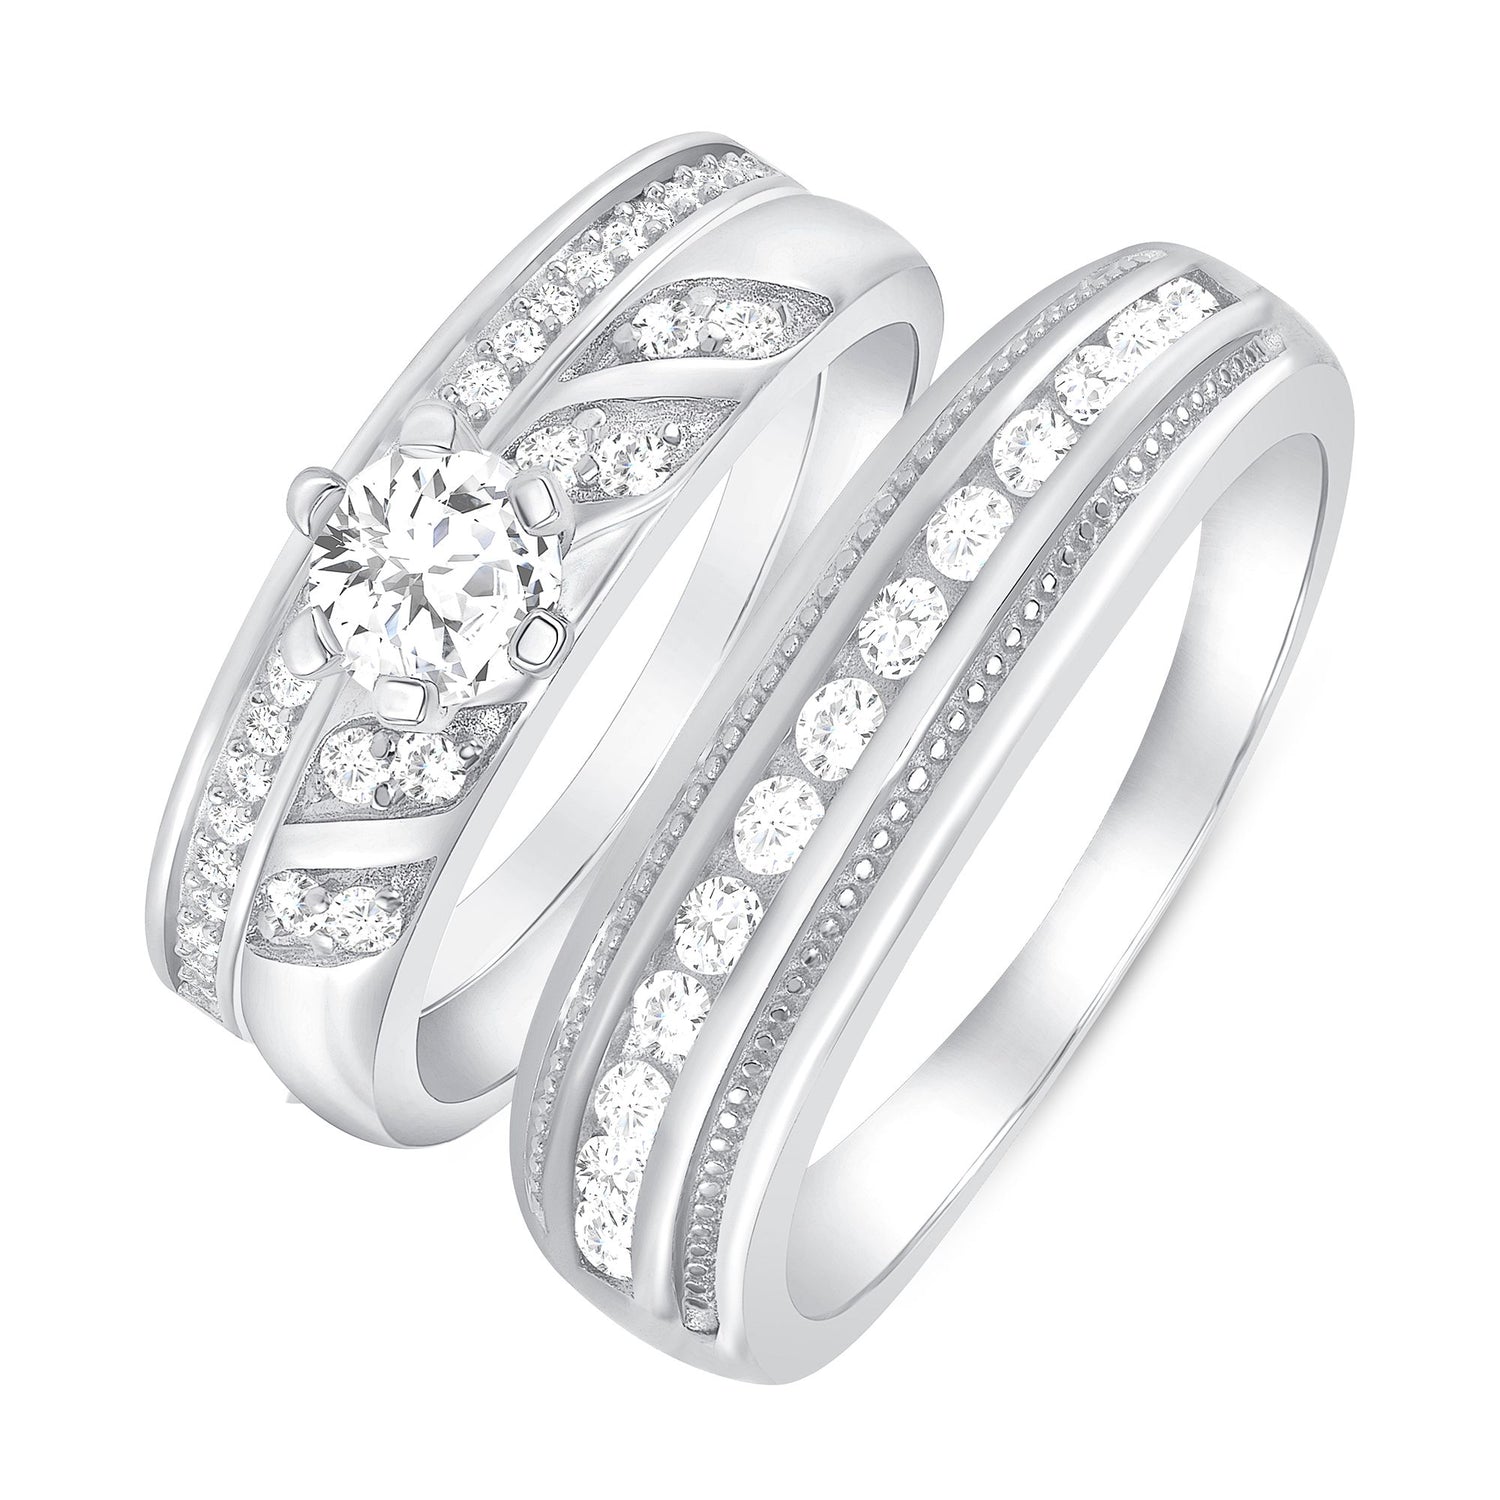 925 Sterling Silver Round CZ with Wrap Decoration, Channel Bead Setting &amp; Milgrain His &amp; Hers Trio Wedding Set